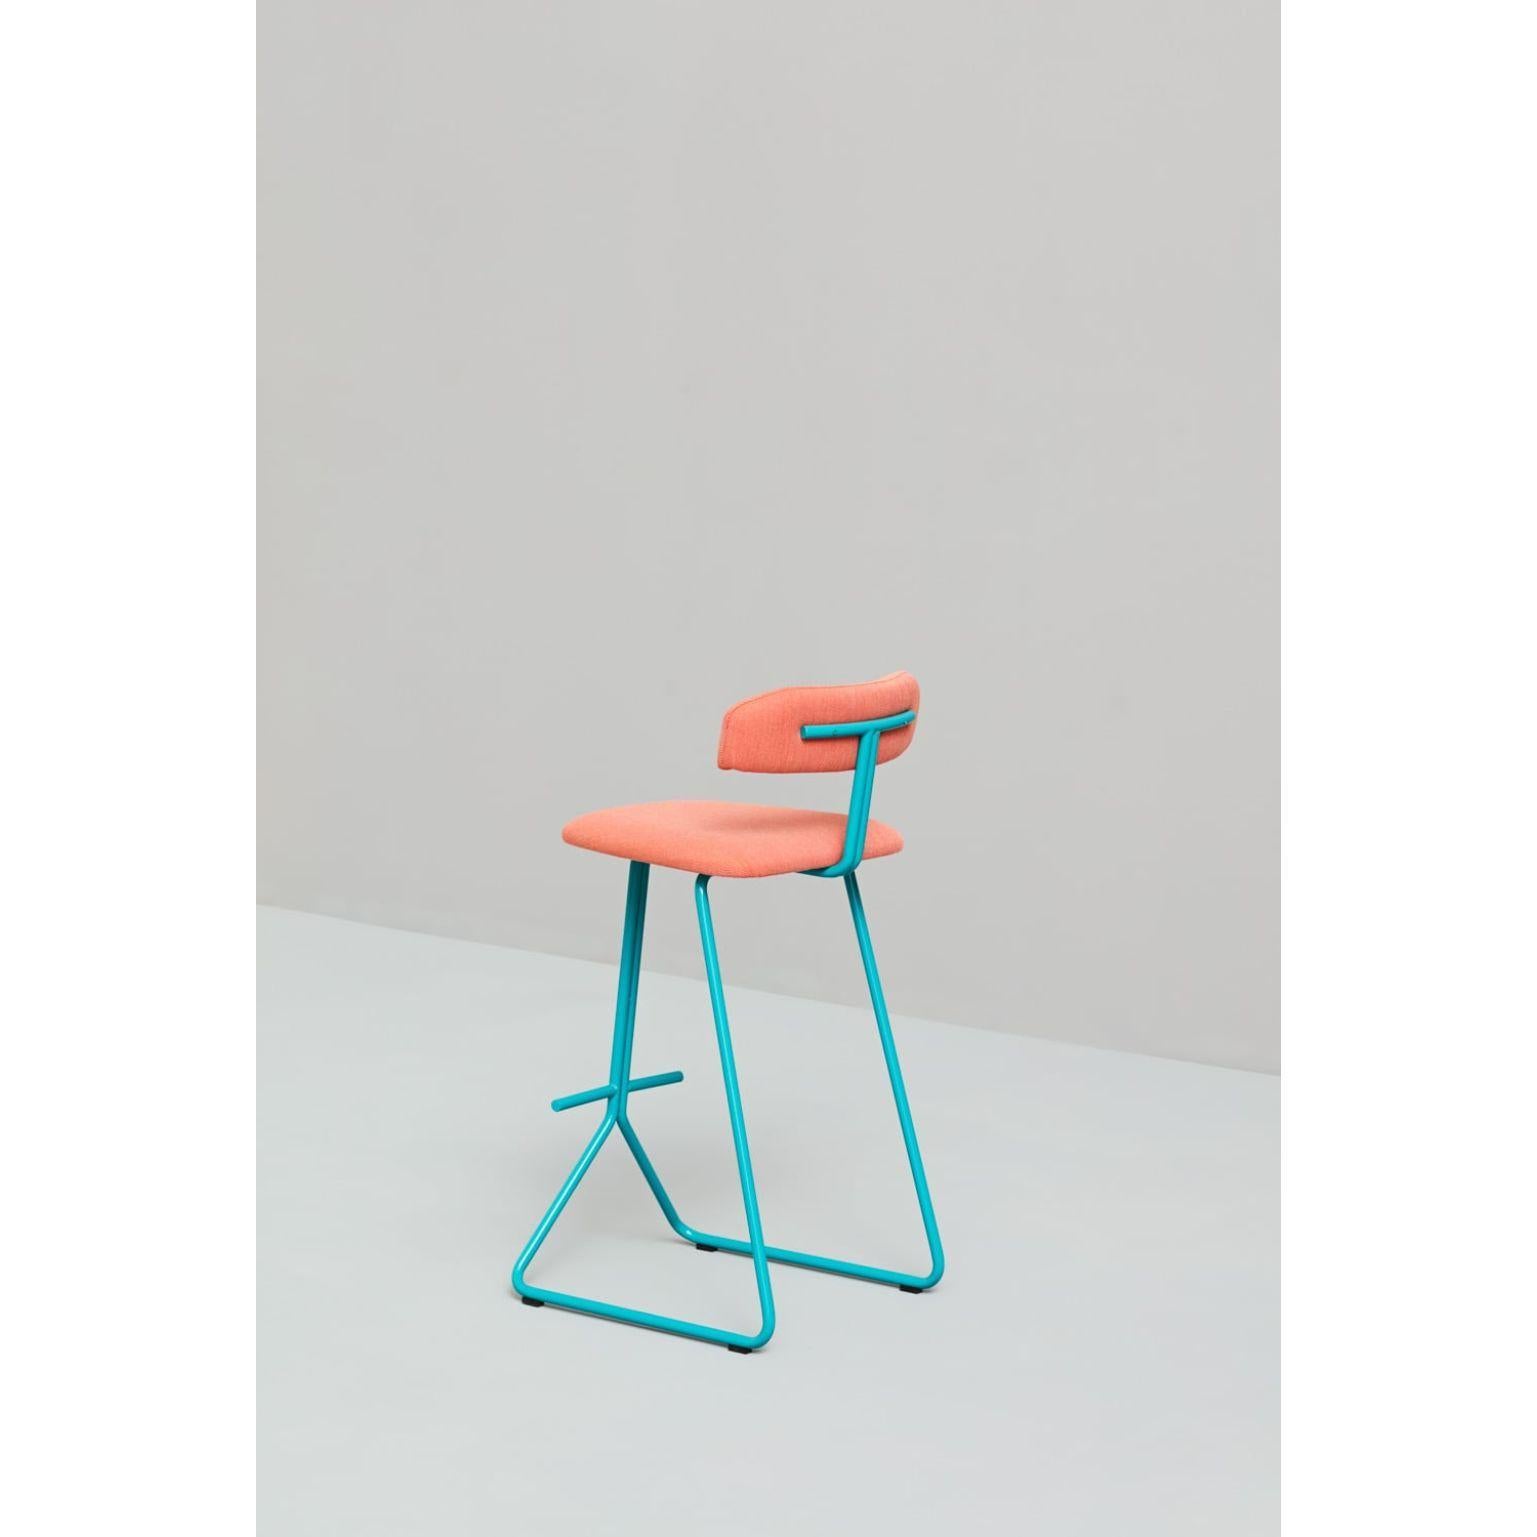 A set of rider stool & chair by Pavel Vetrov
Dimensions: Stool W50, D56, H104, Seat78, Chair W50, D56, H82, Seat 48
Materials: Crome plated or painted iron structure
Foam CMHR (high resilience and flame retardant) for all our cushion filling